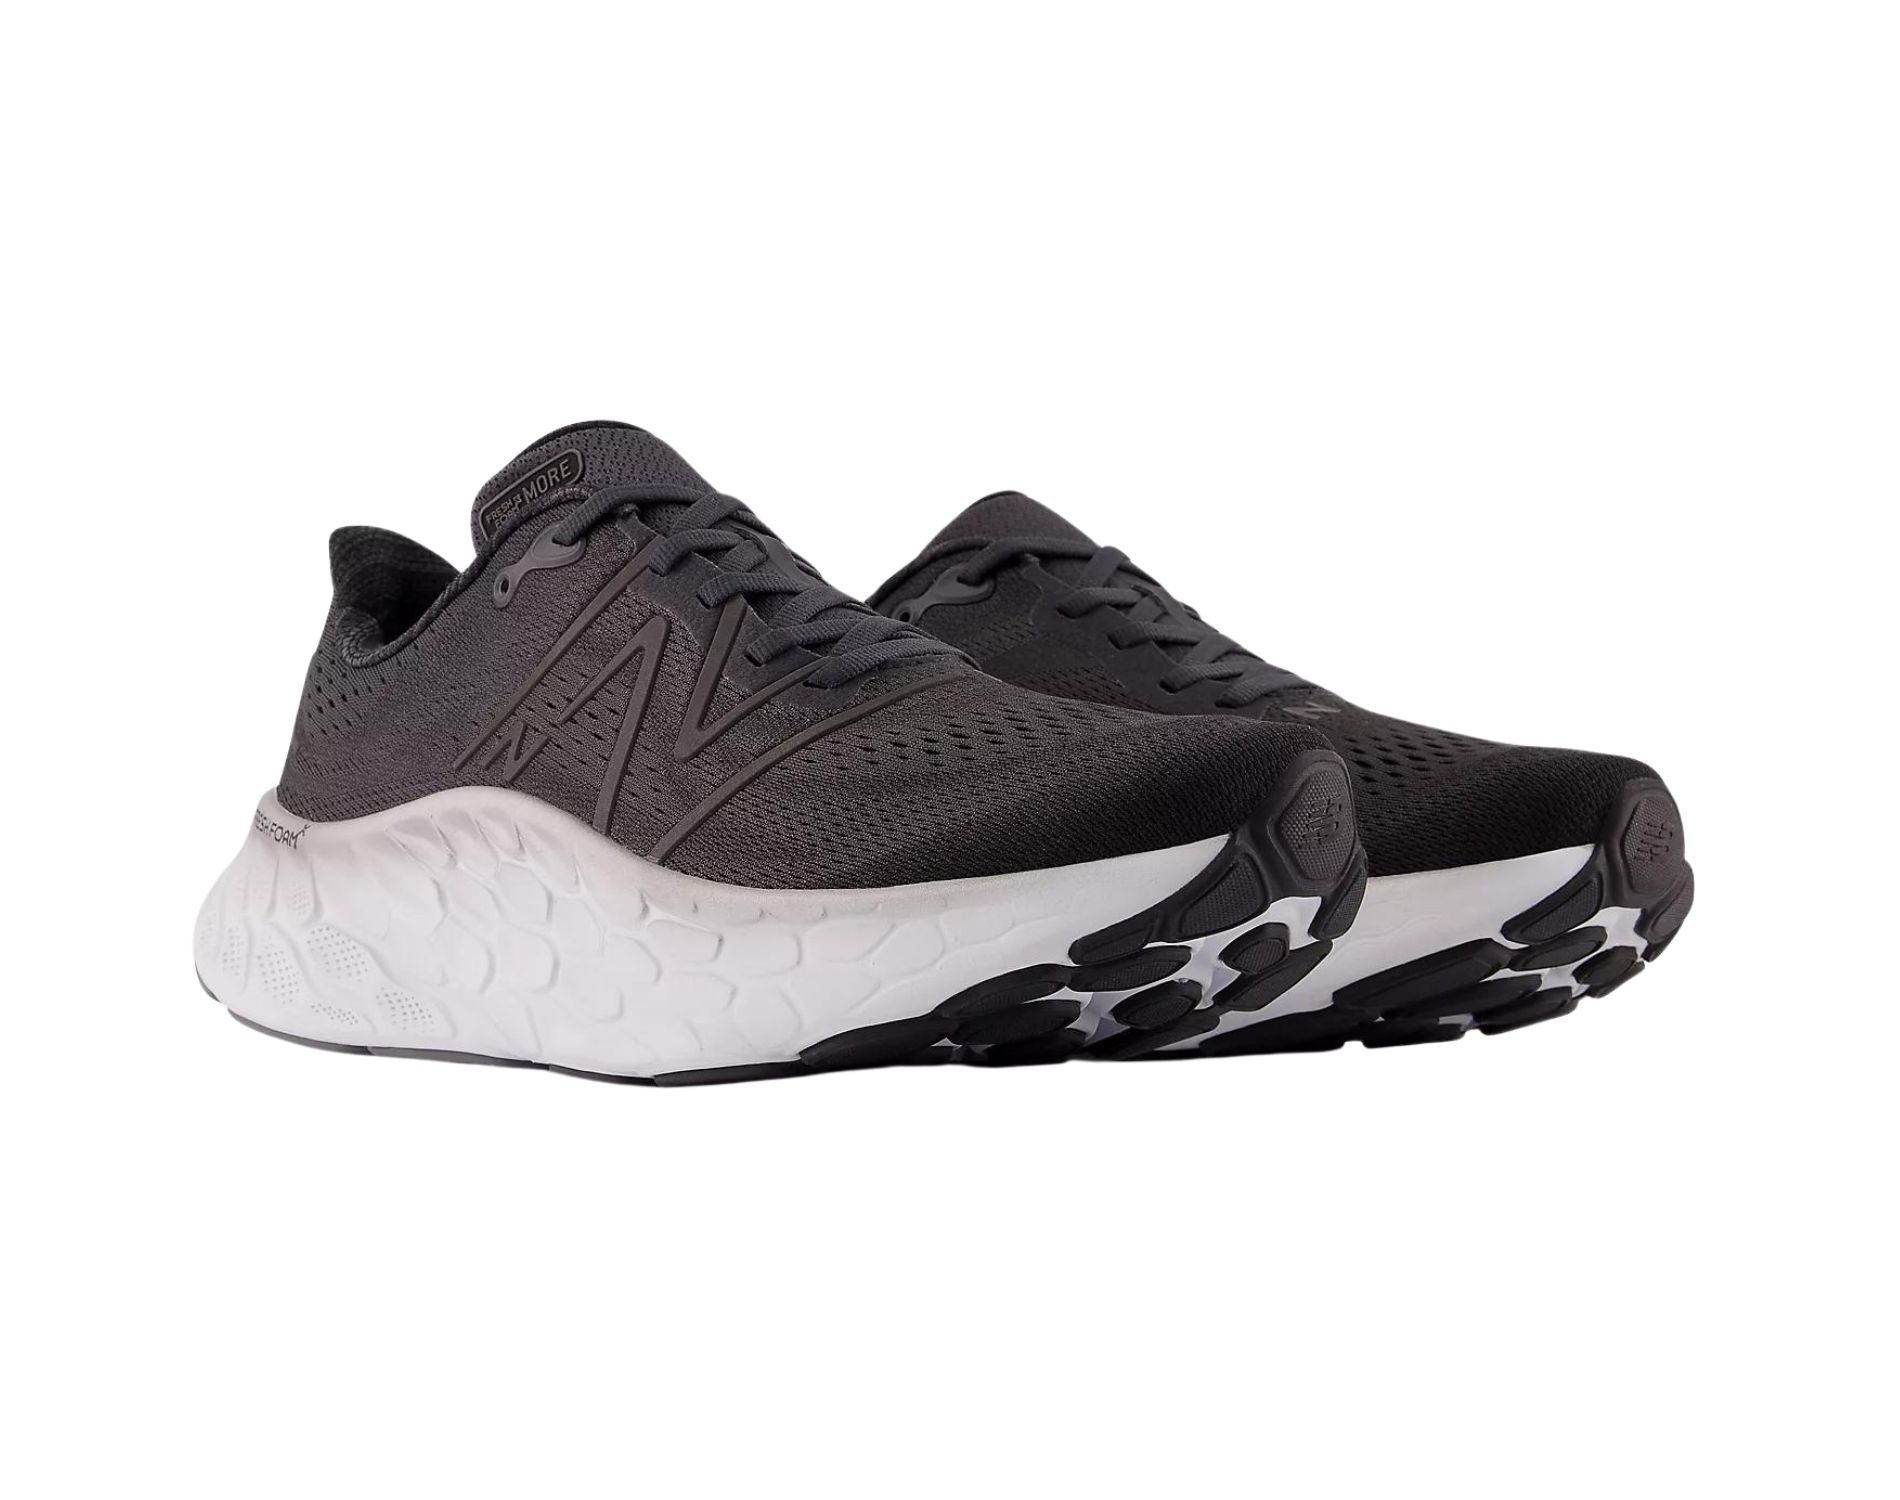 New Balance More v 4 womens running shoe in b width in black colour